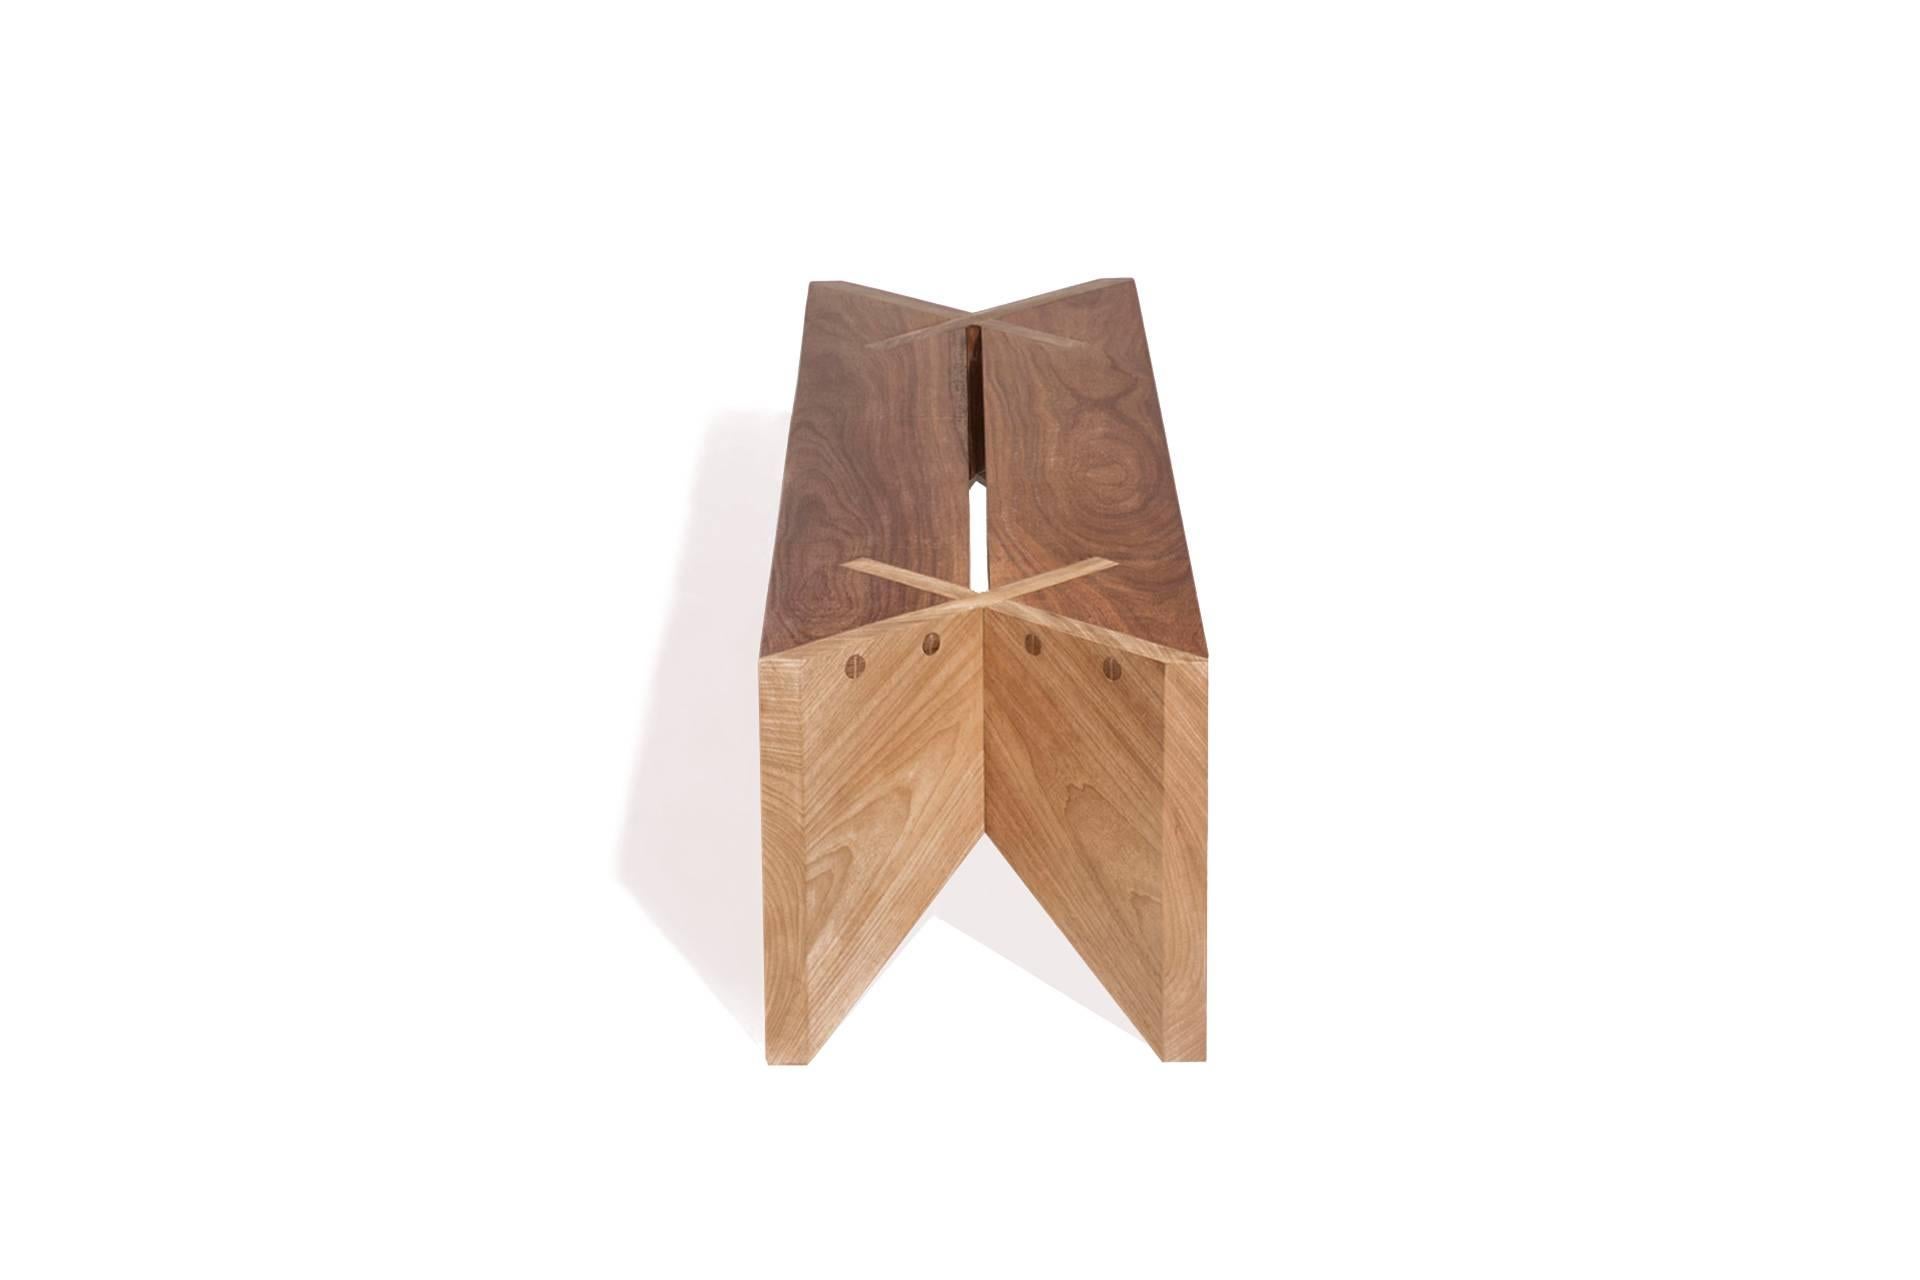 This contemporary bench in hardwood is an interpretation of functionality and technical refinement of fittings and handmade wood joints, the origin of the Xingu bench design.

The combination of all components in this bench is visually highlighted,